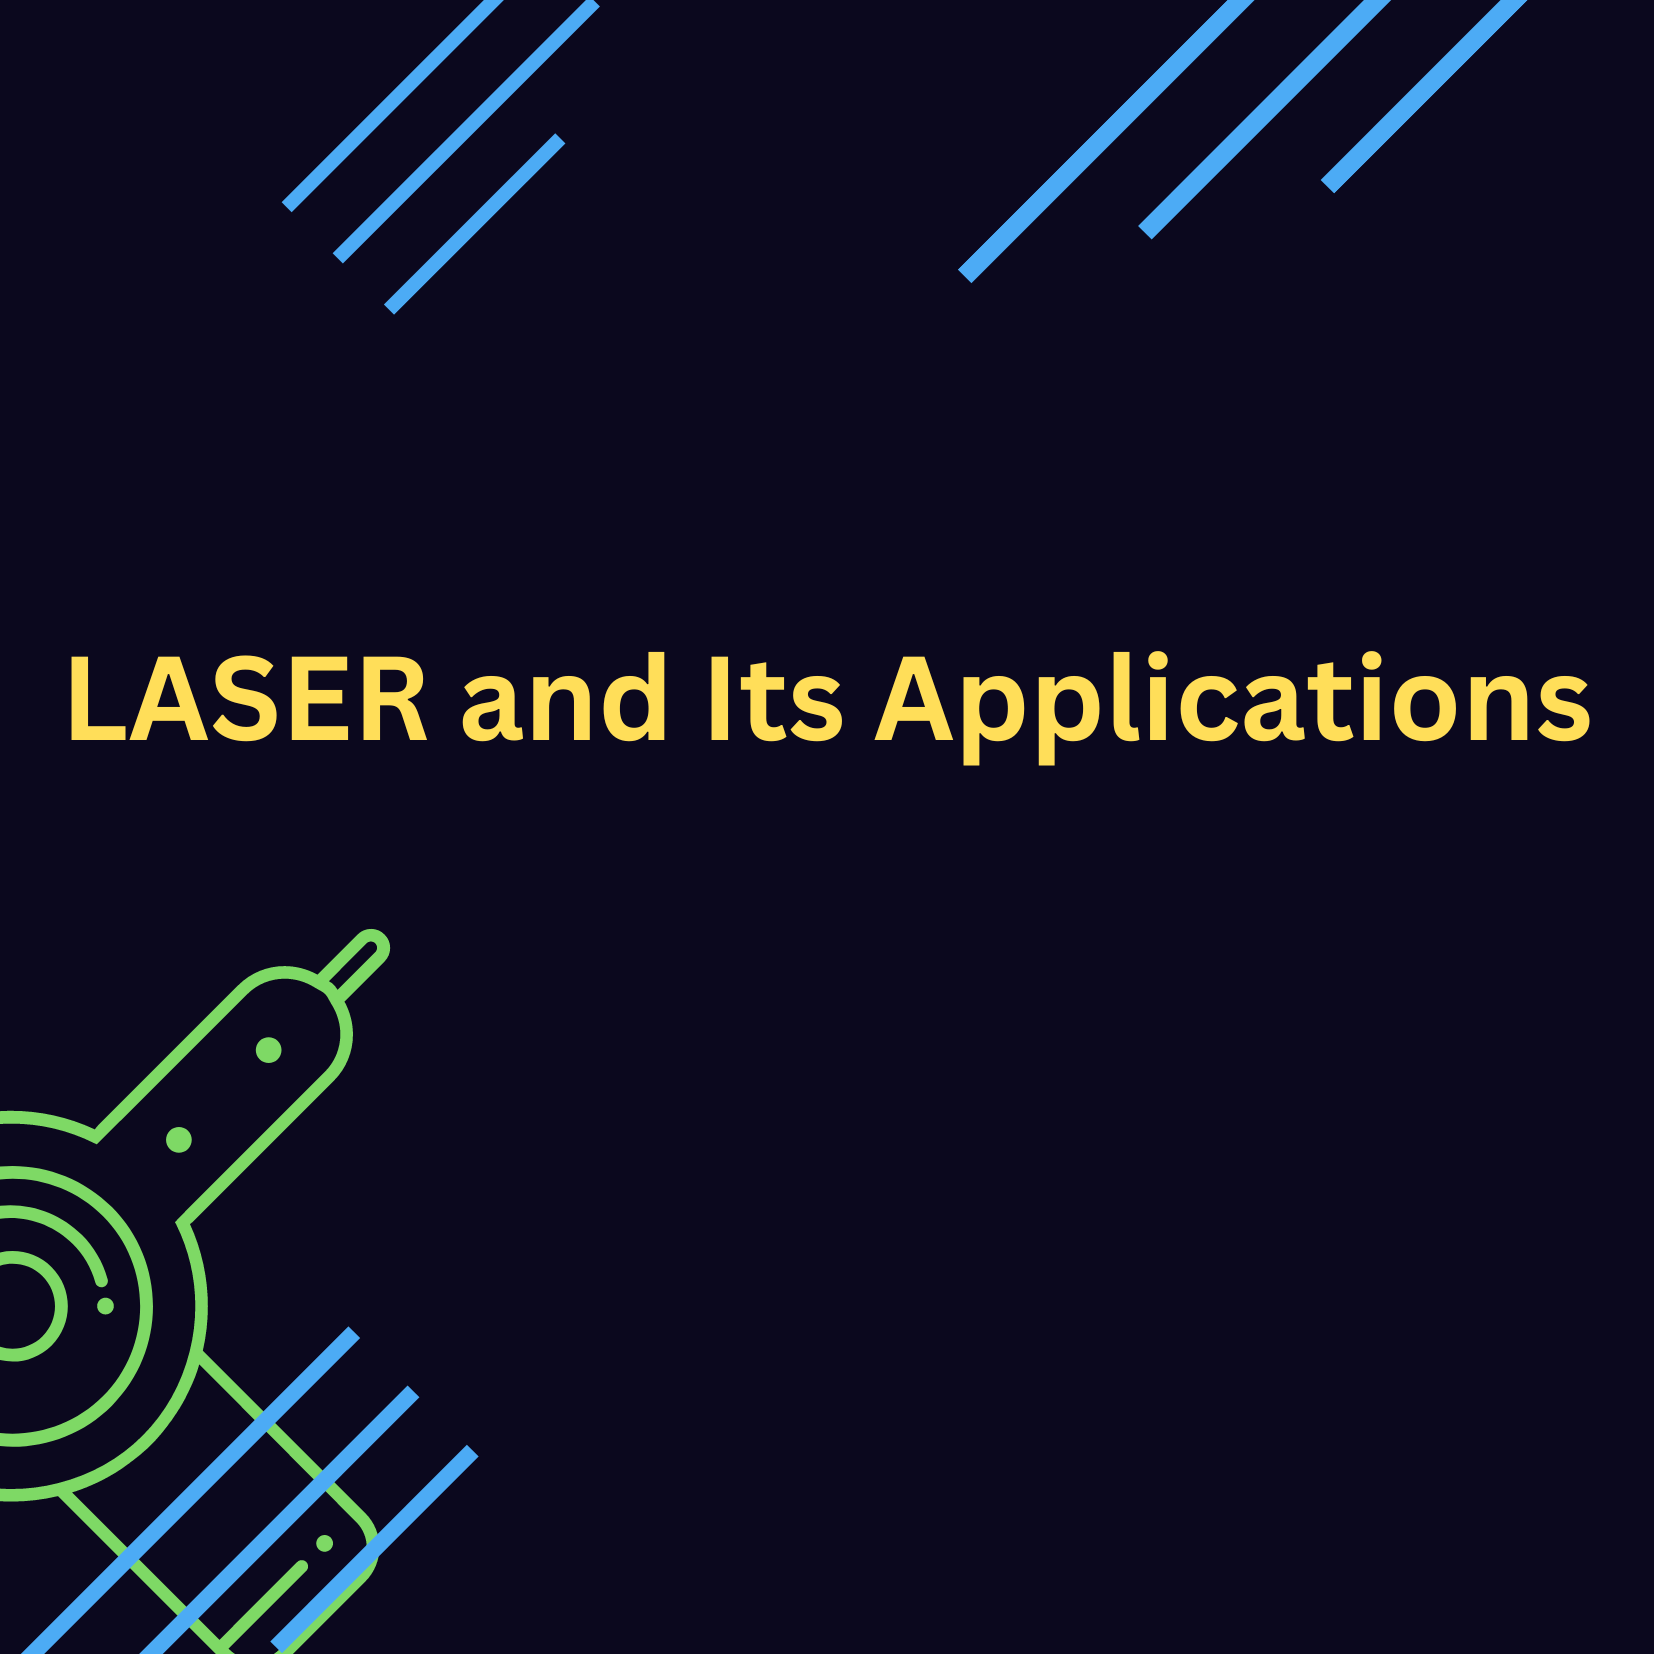 23103_LASER and Its Applications